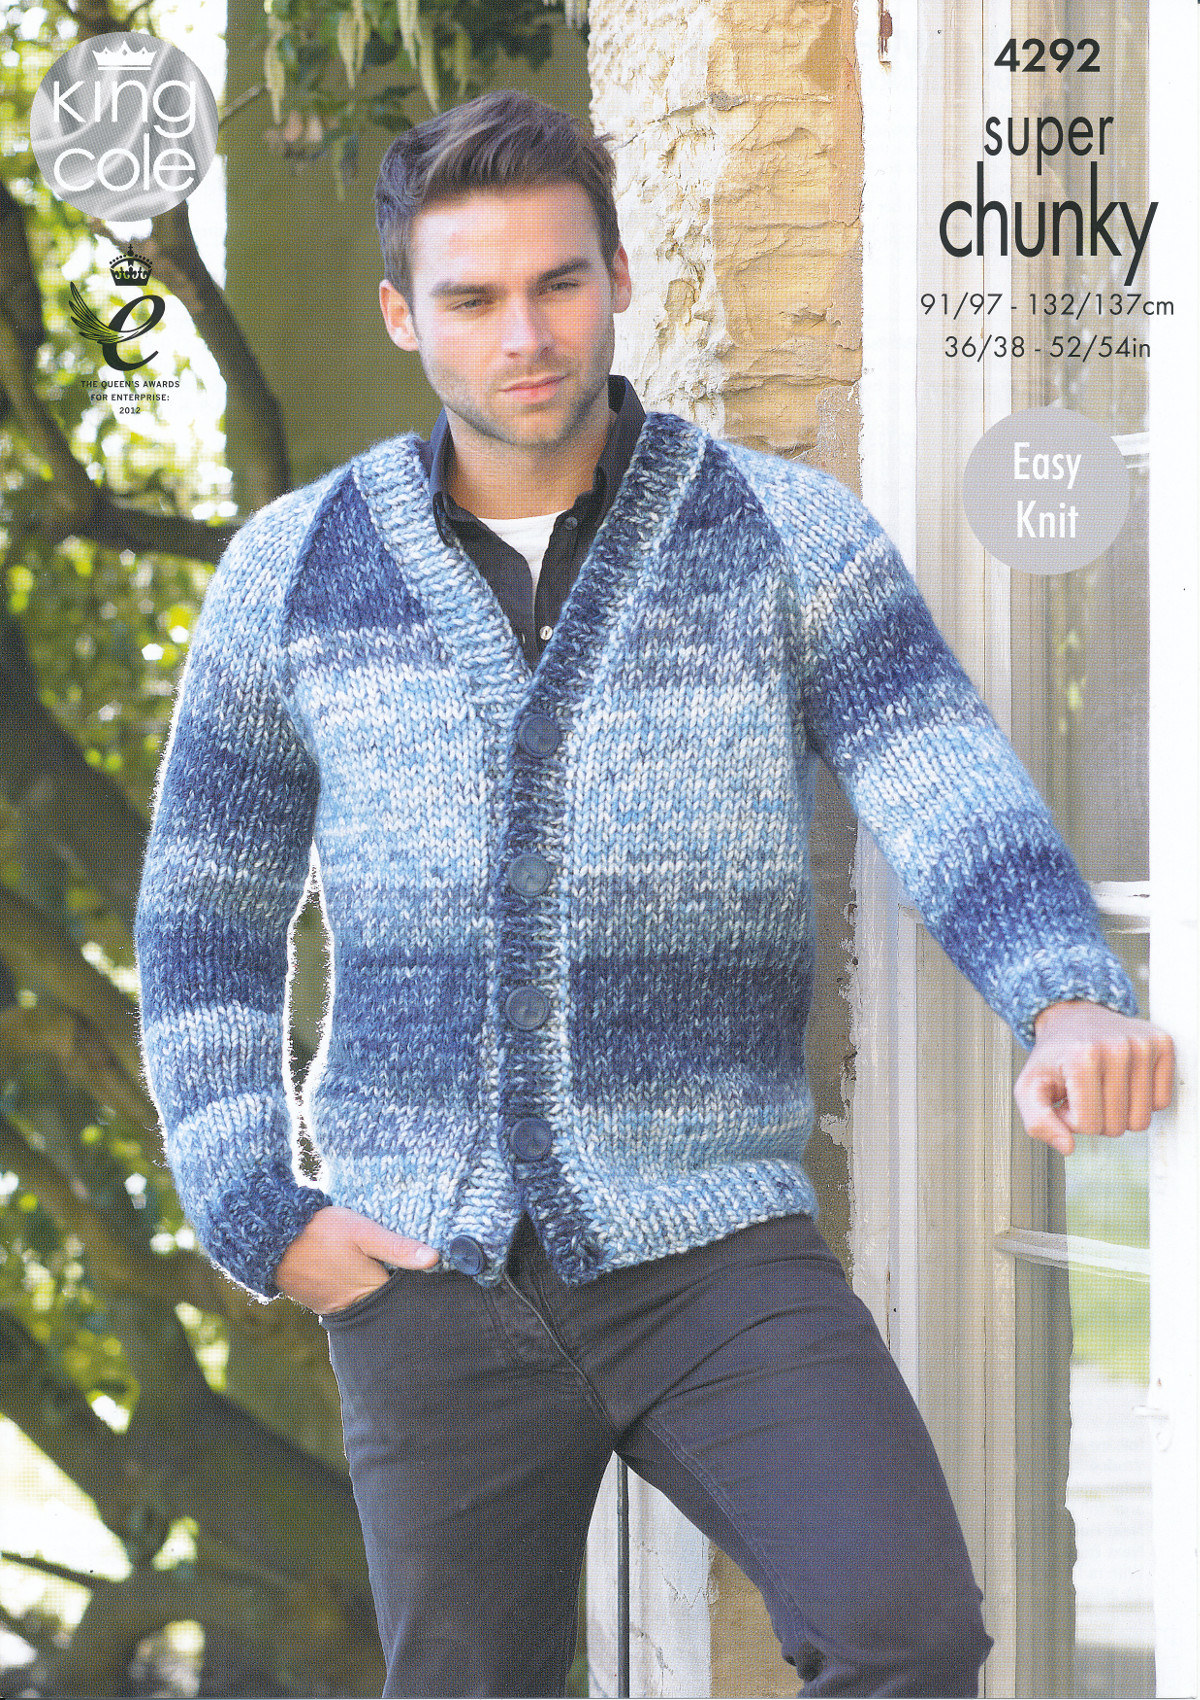 Mens Knitting Patterns Details About Mens Super Chunky Knitting Pattern King Cole Easy Knit Jumper Cardigan 4292